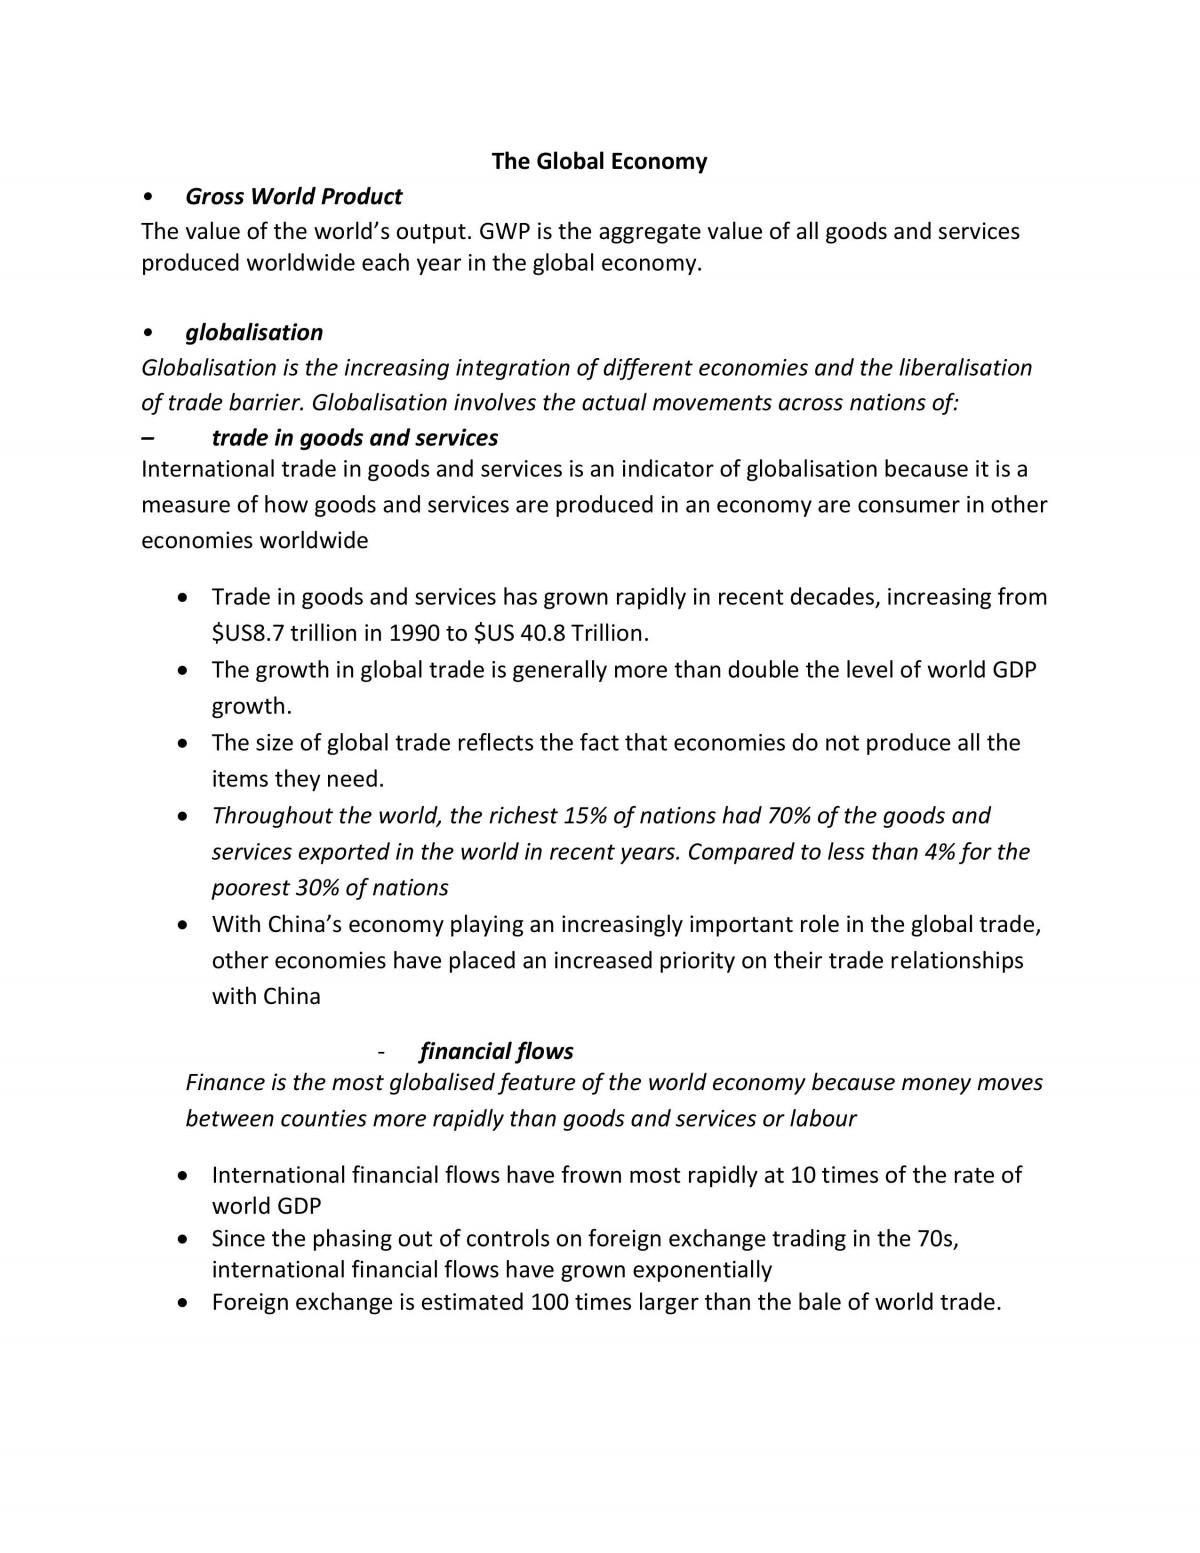 The Global Economy Syllabus Notes - Page 1